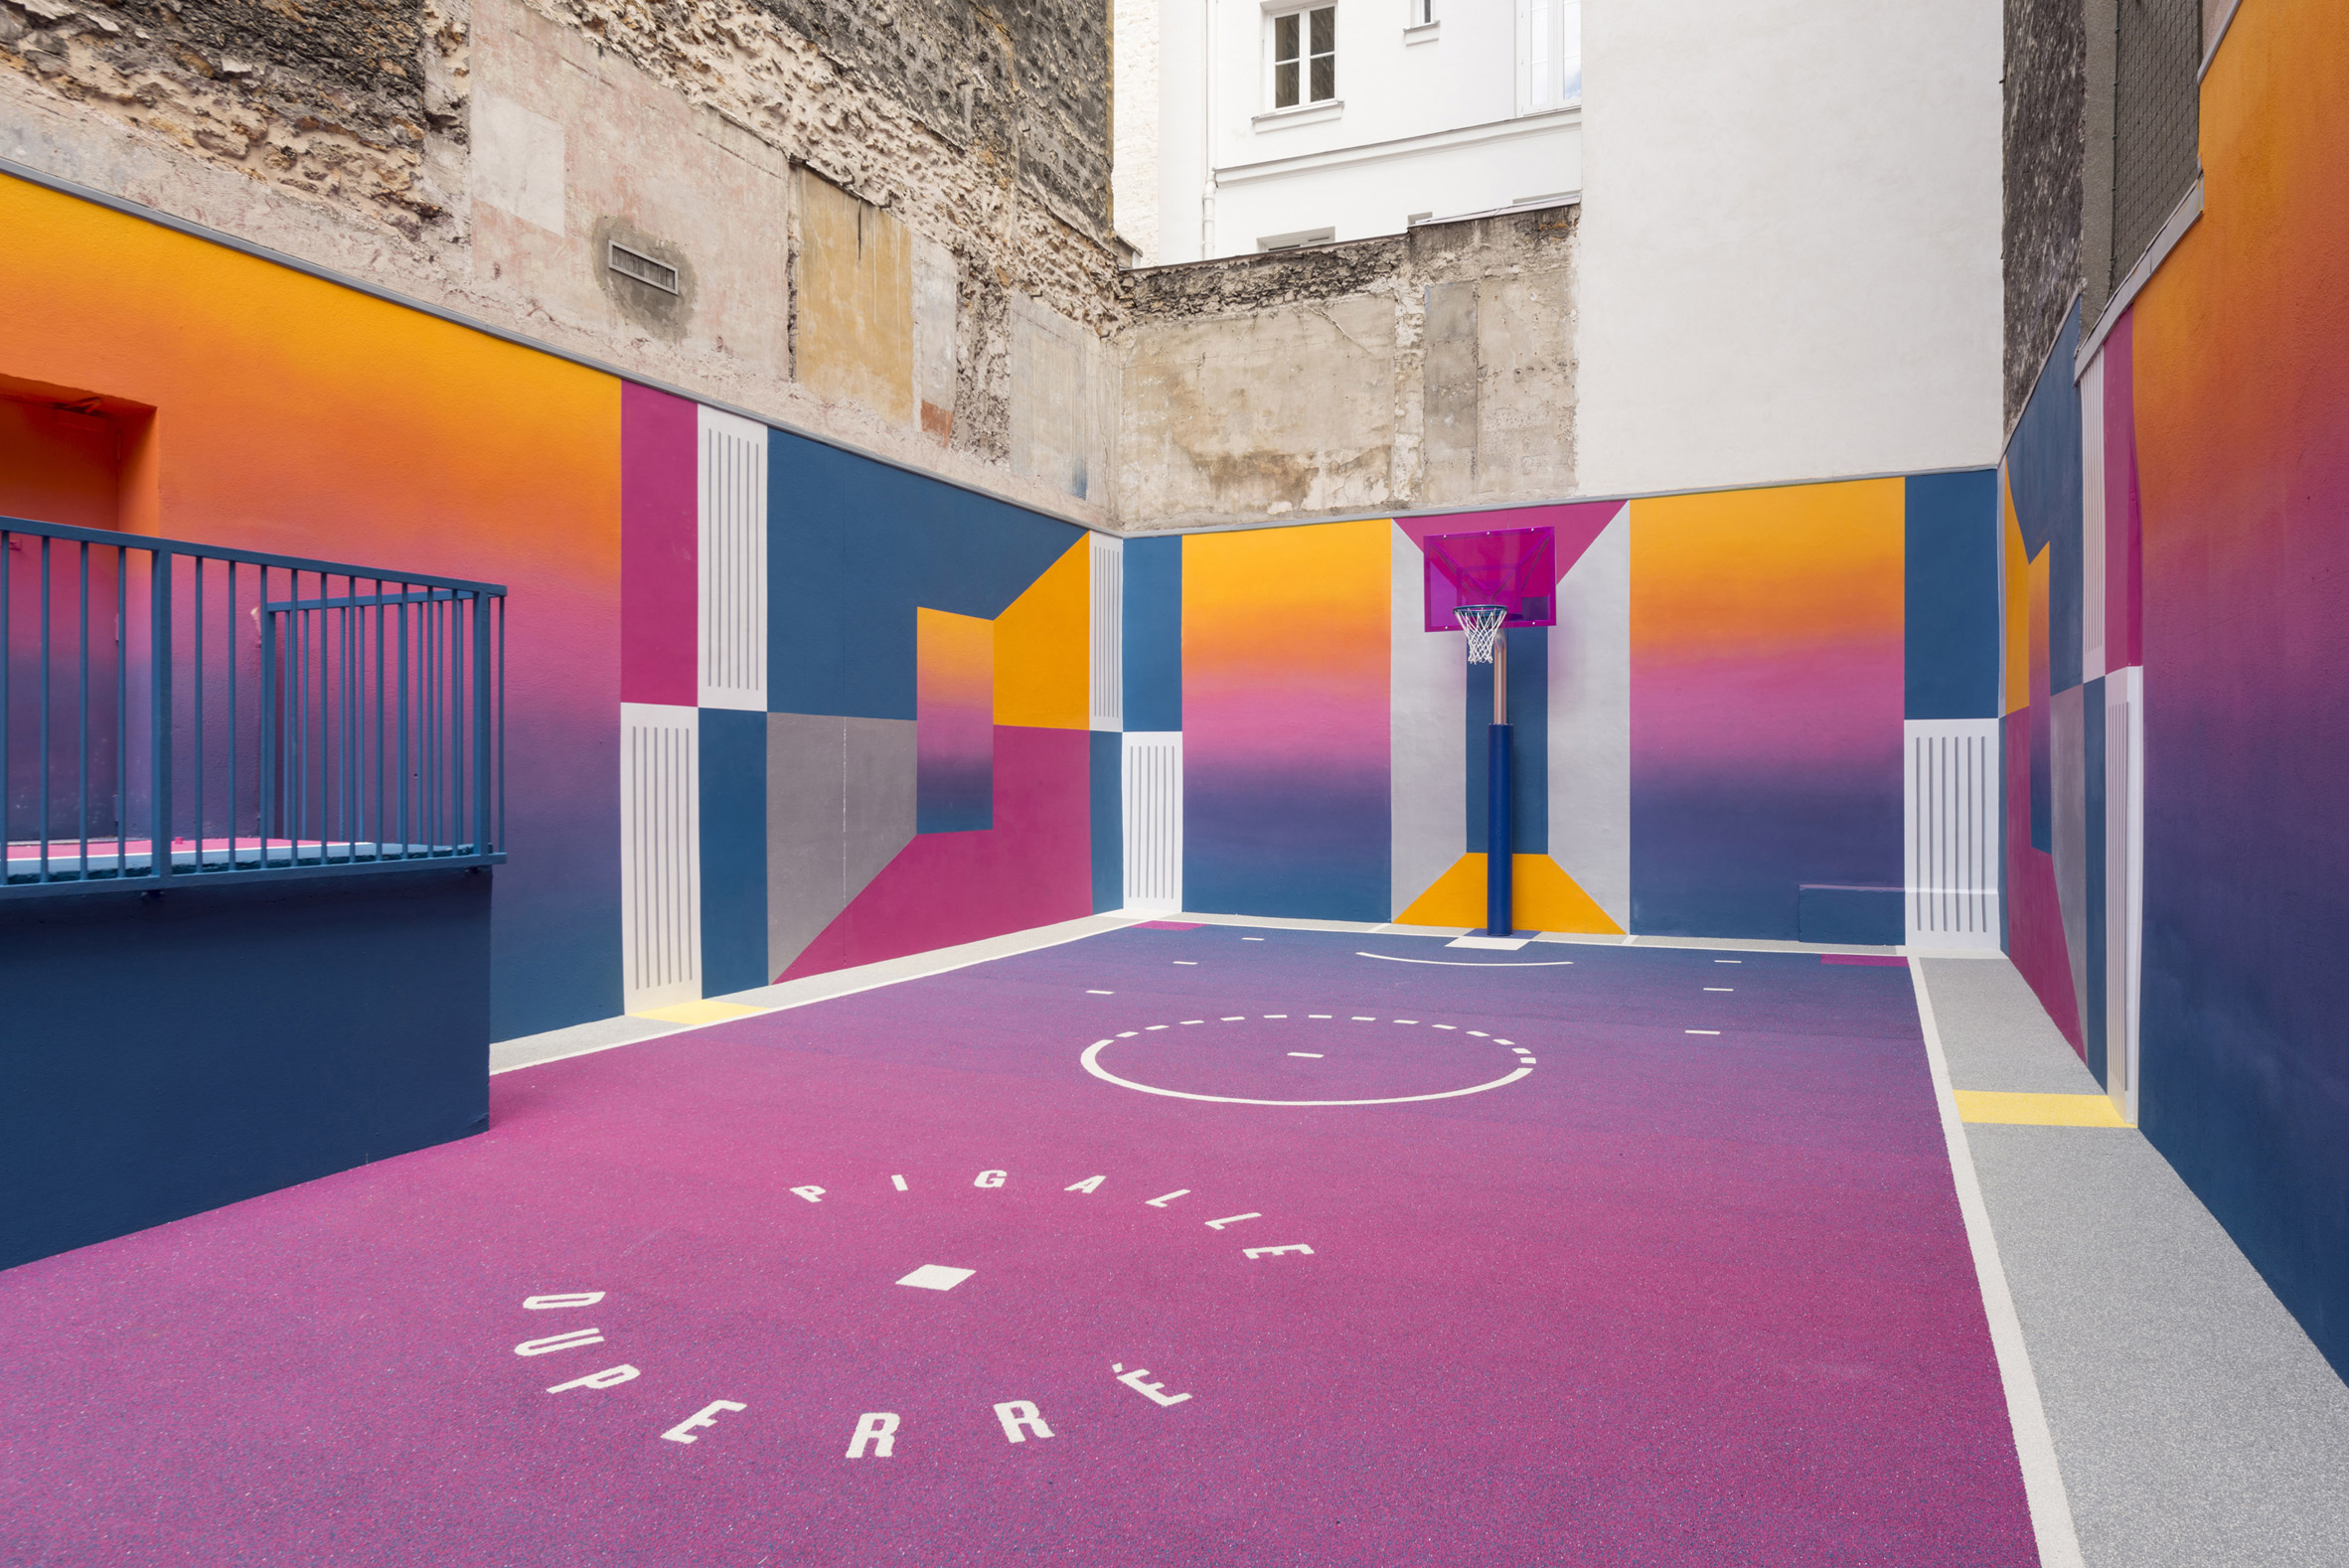 Polar Domar accesorios Colourful Paris basketball court updated with new hues